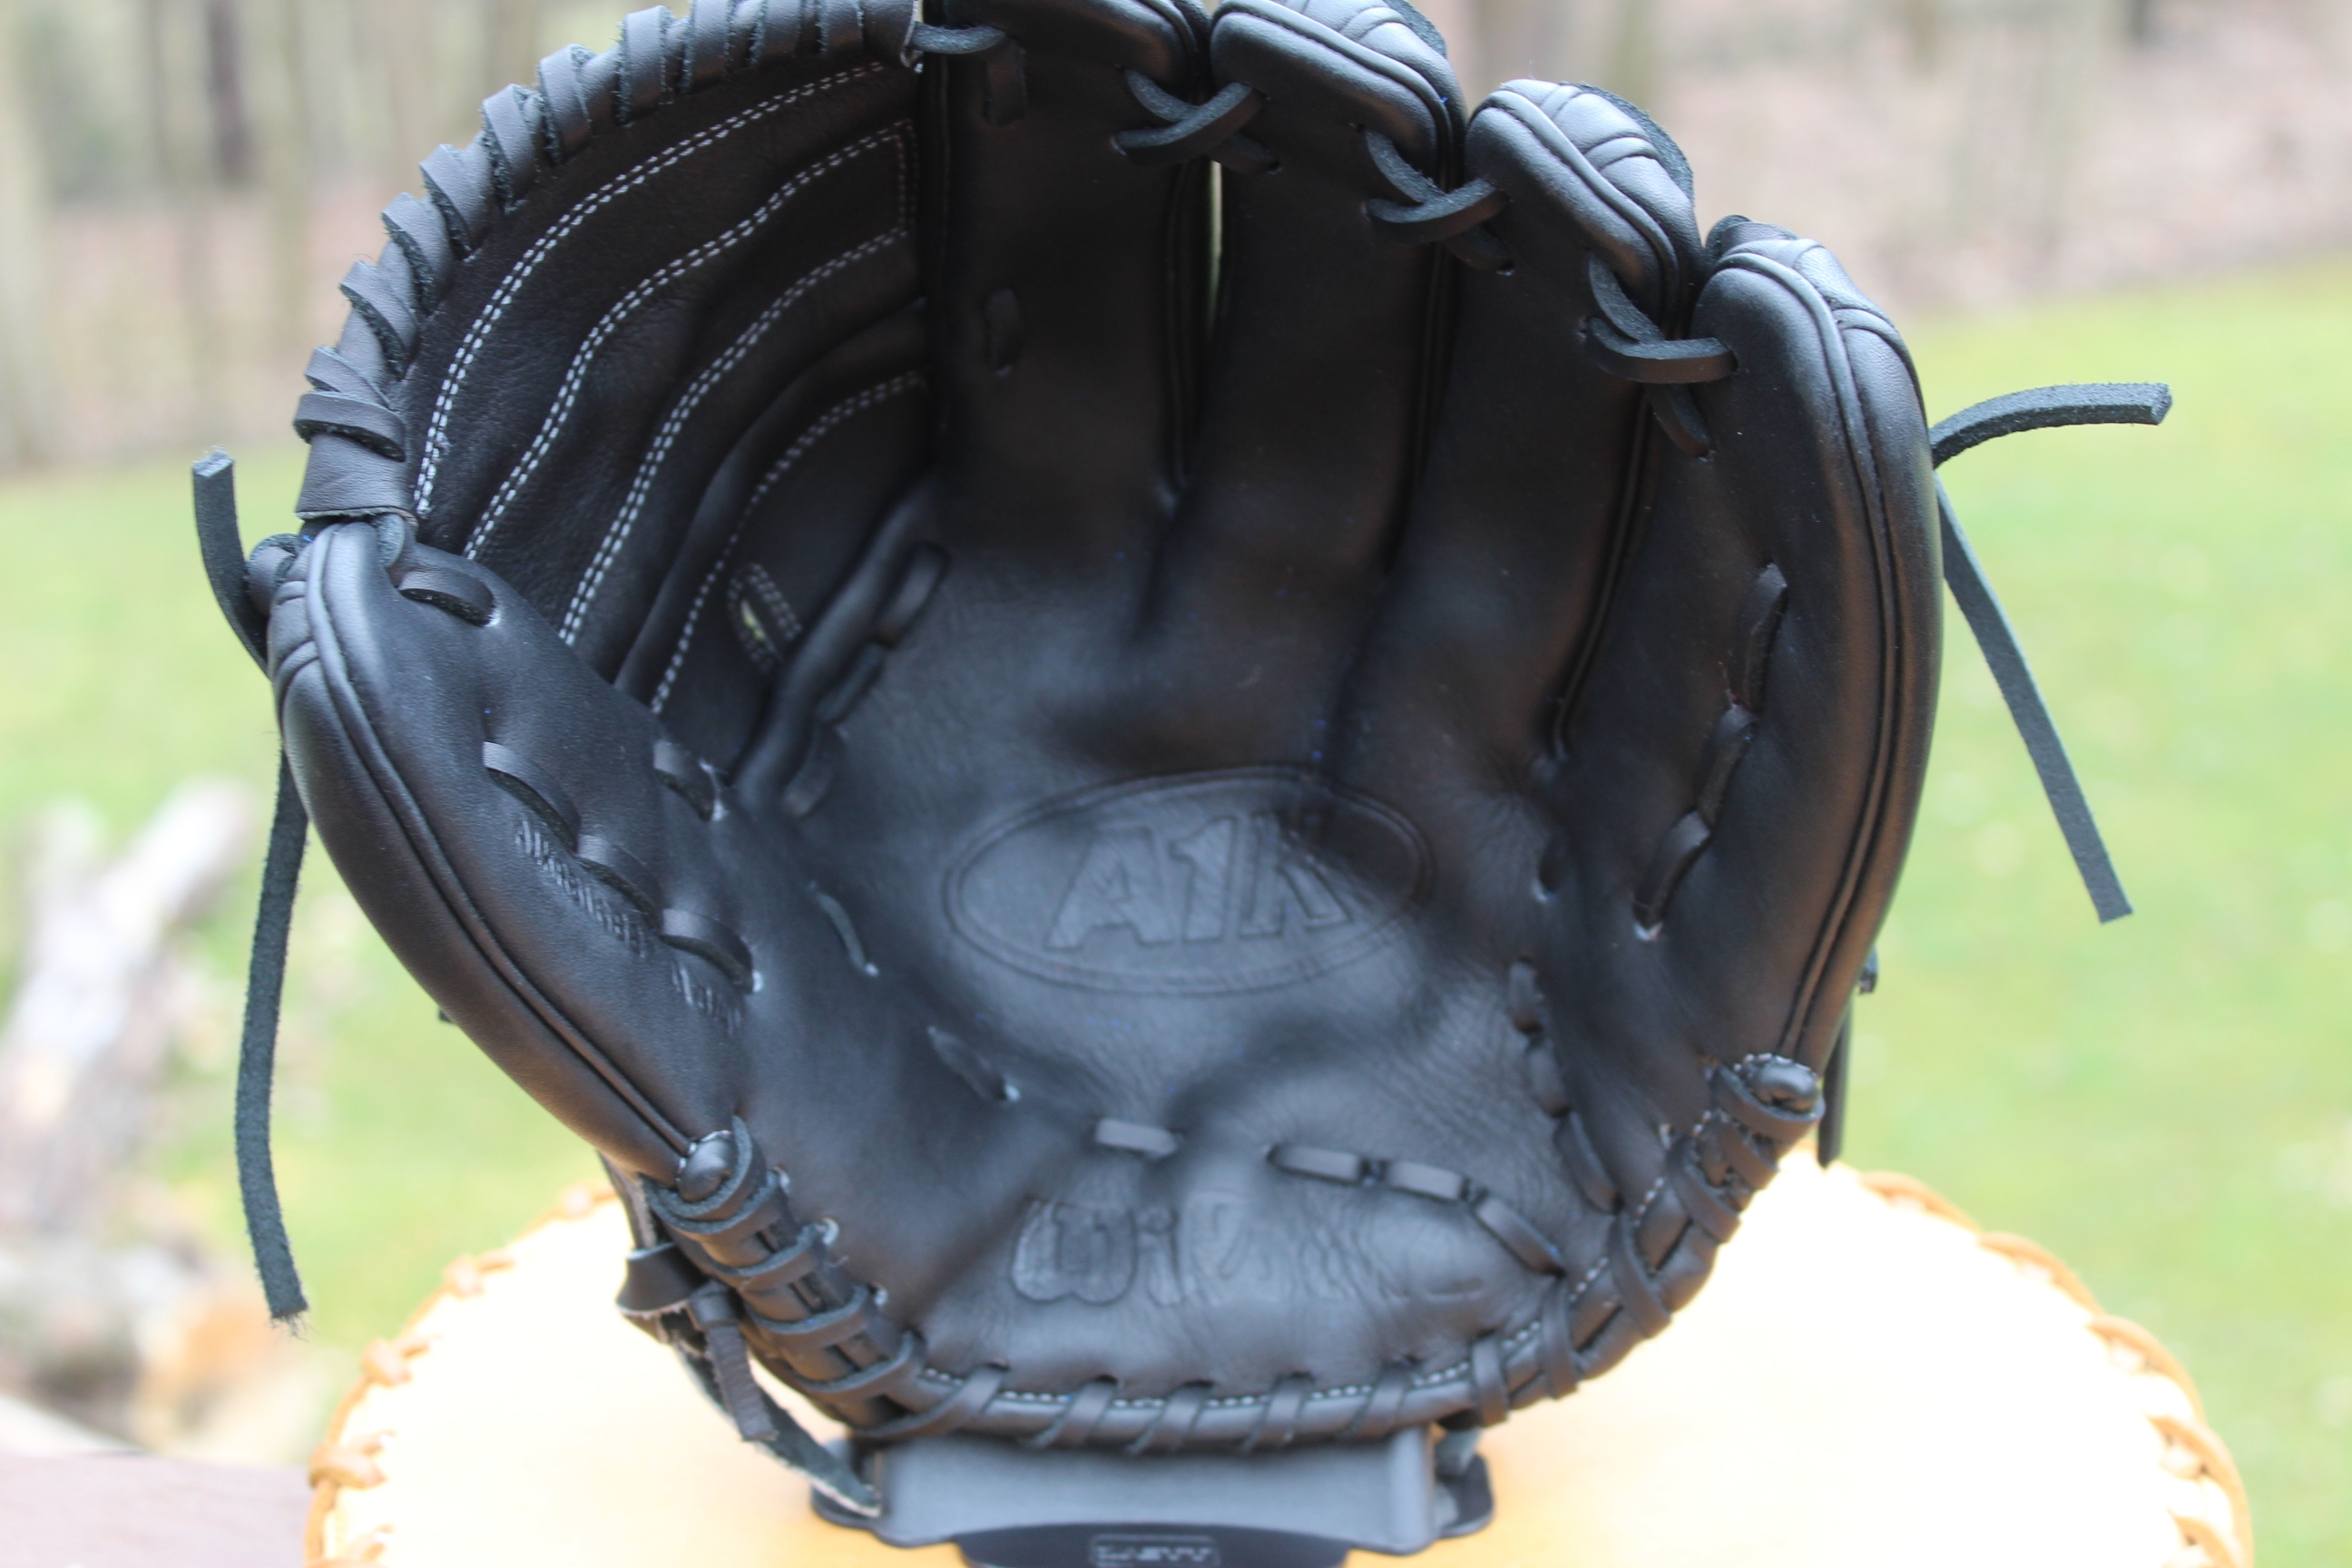 Used Right Hand Throw Wilson Pitcher's A1k Baseball Glove 11.75"